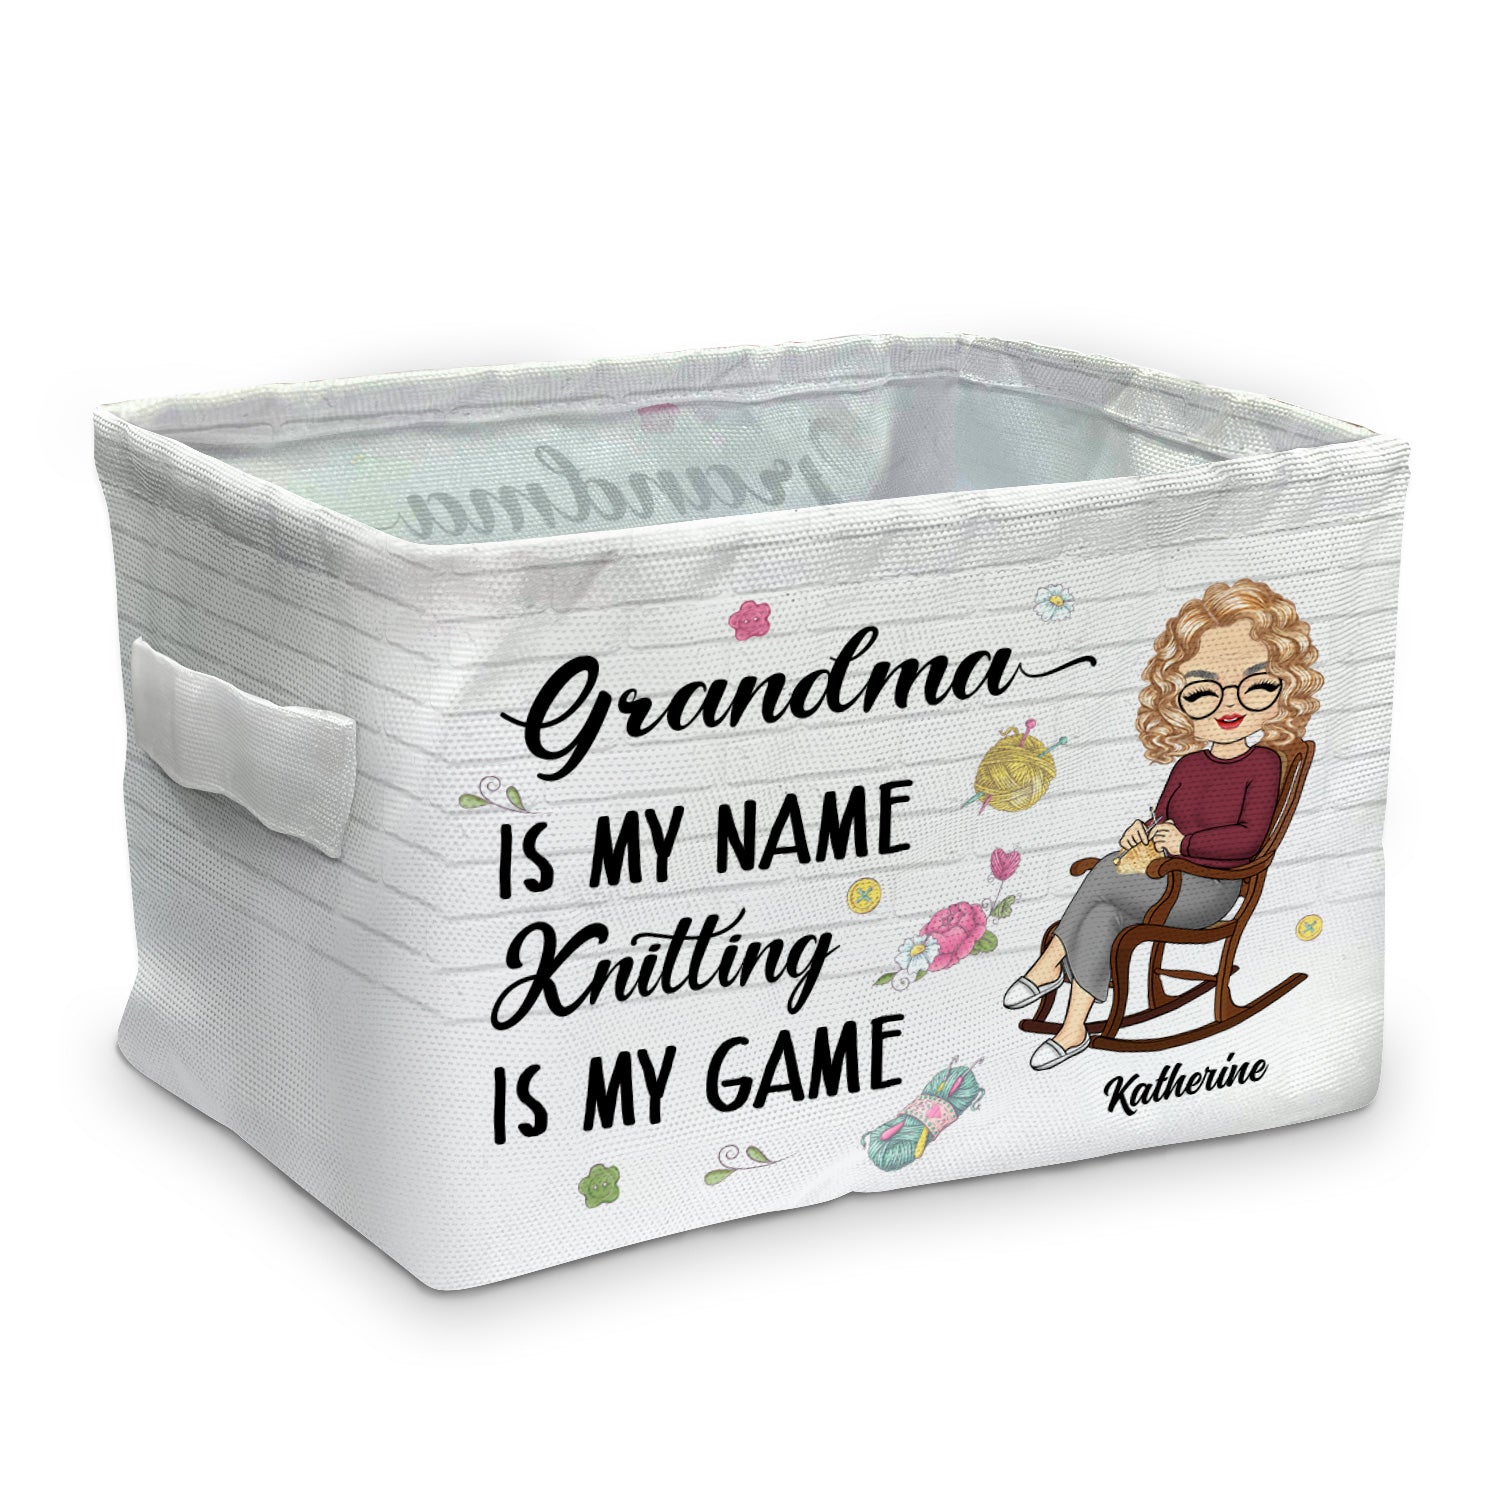 Knitting Is My Game - Gift For Grandma - Personalized Storage Box